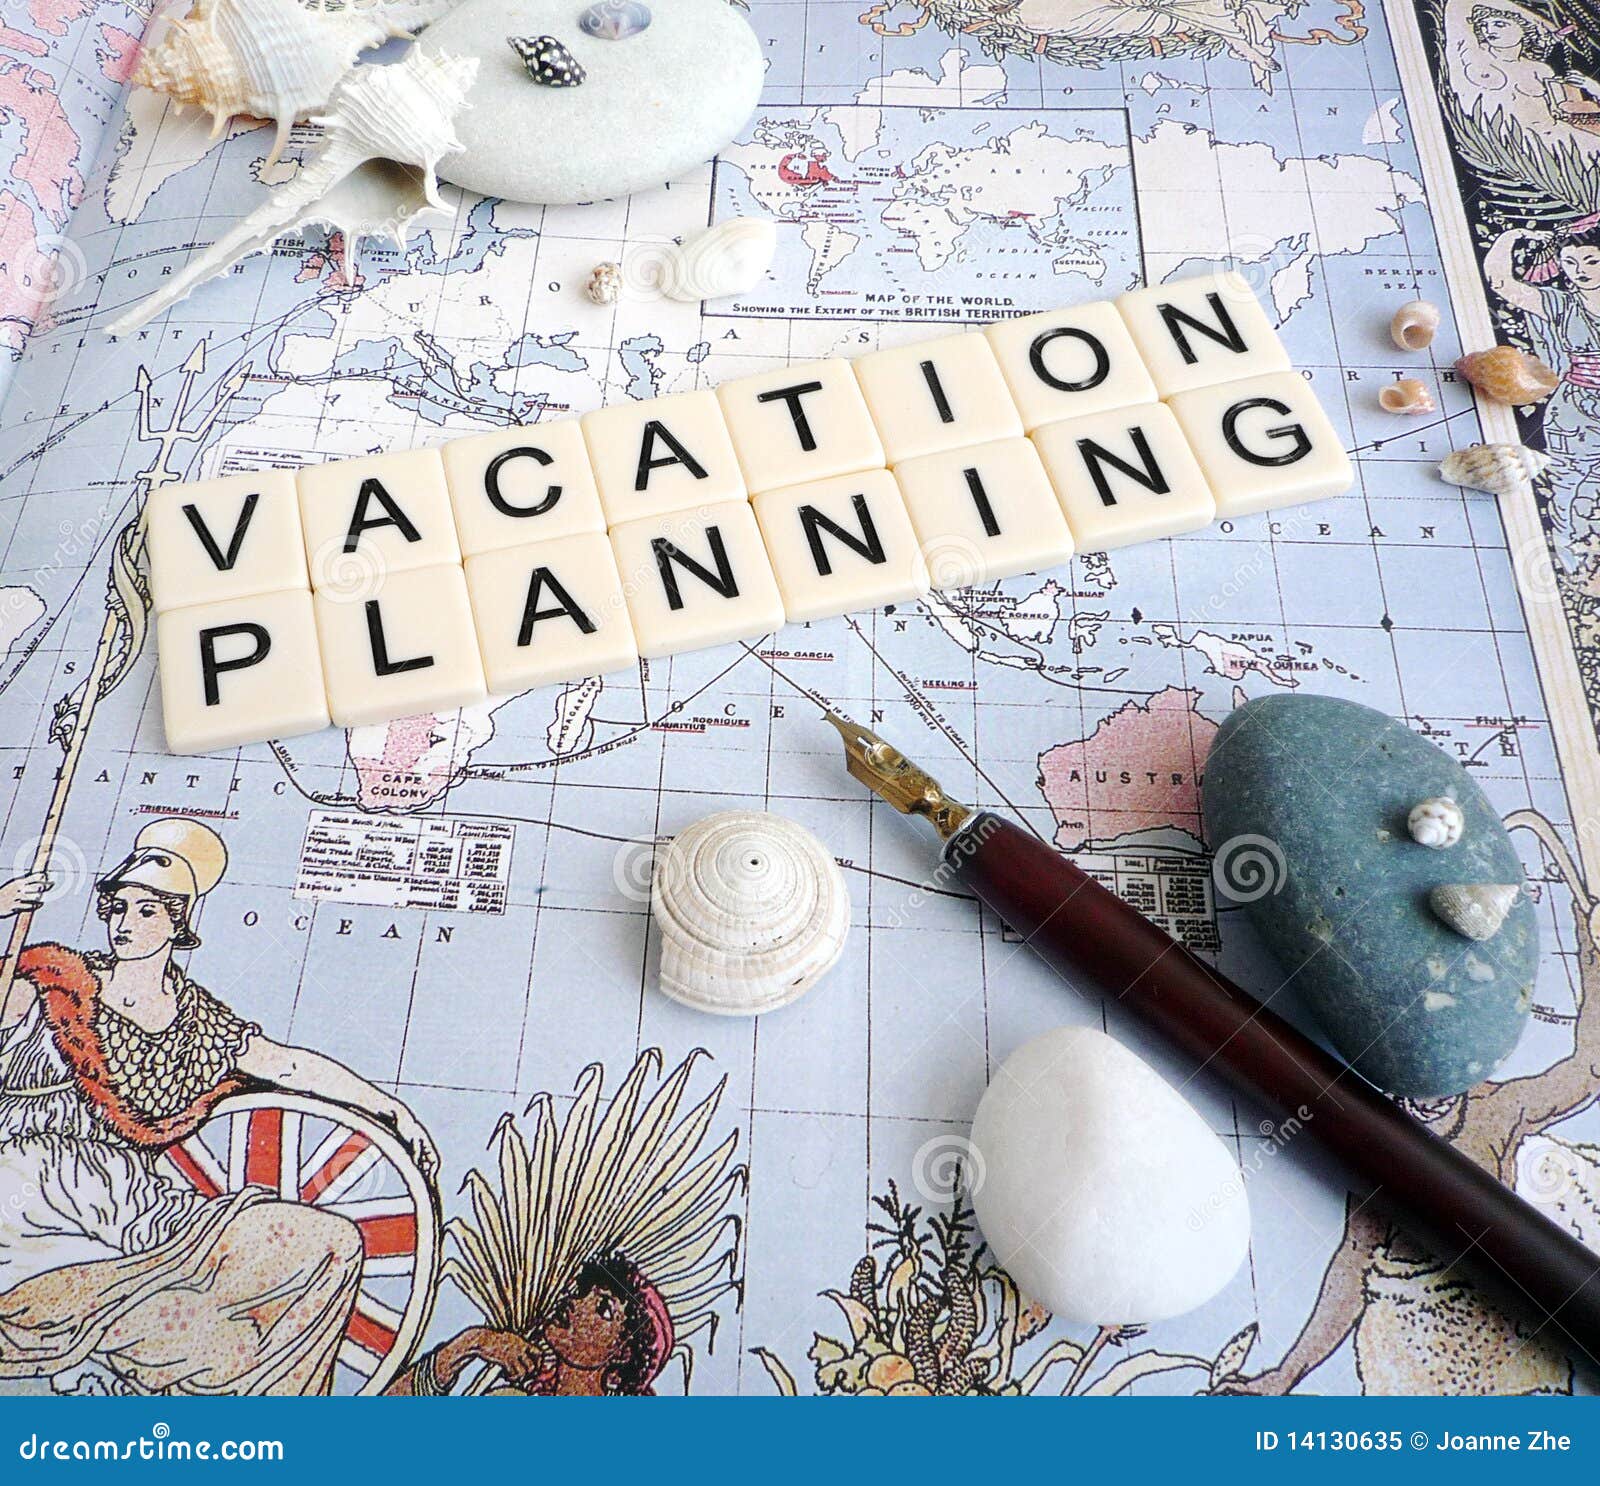 vacation planning concept